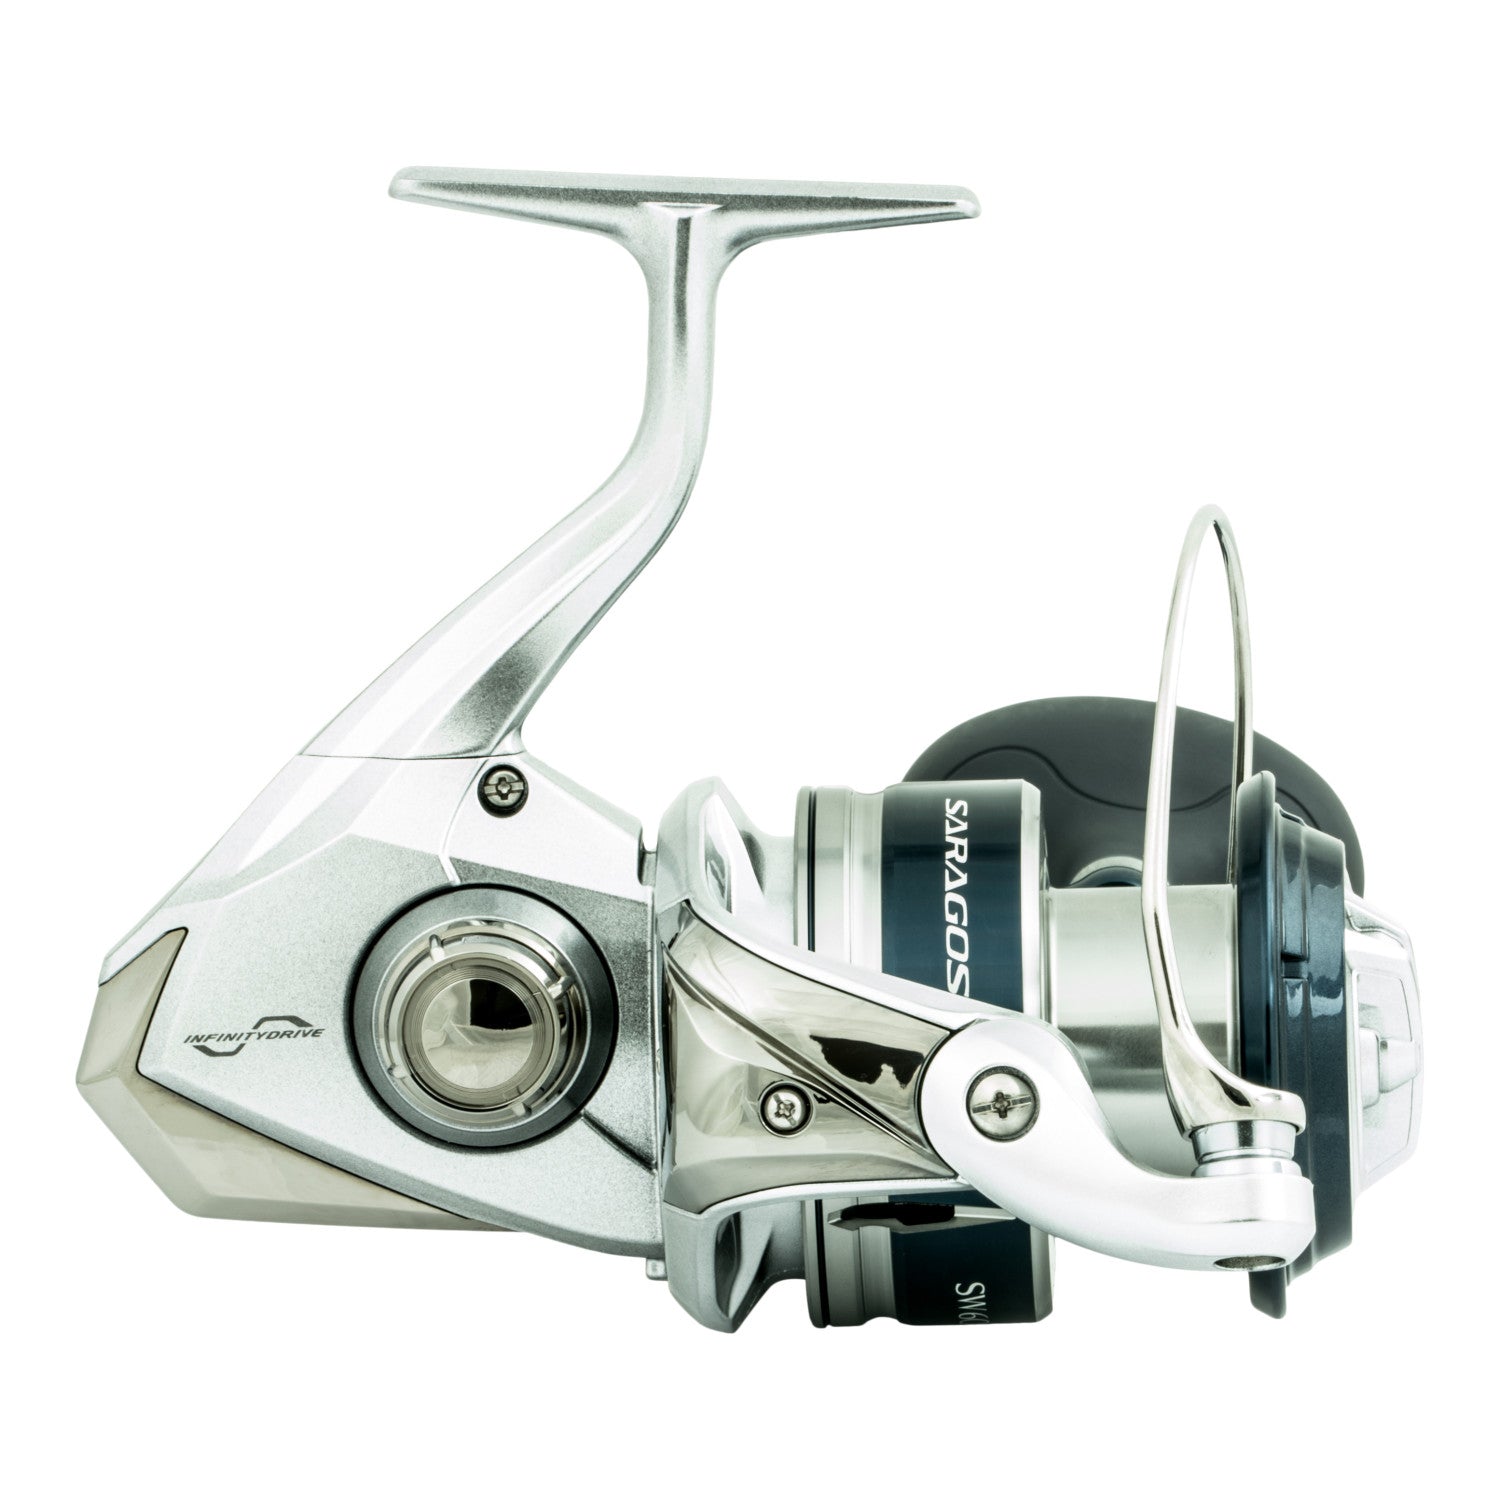 Top Saltwater Conventional Reels: Guide & Reviews – Beach Bum Outdoors